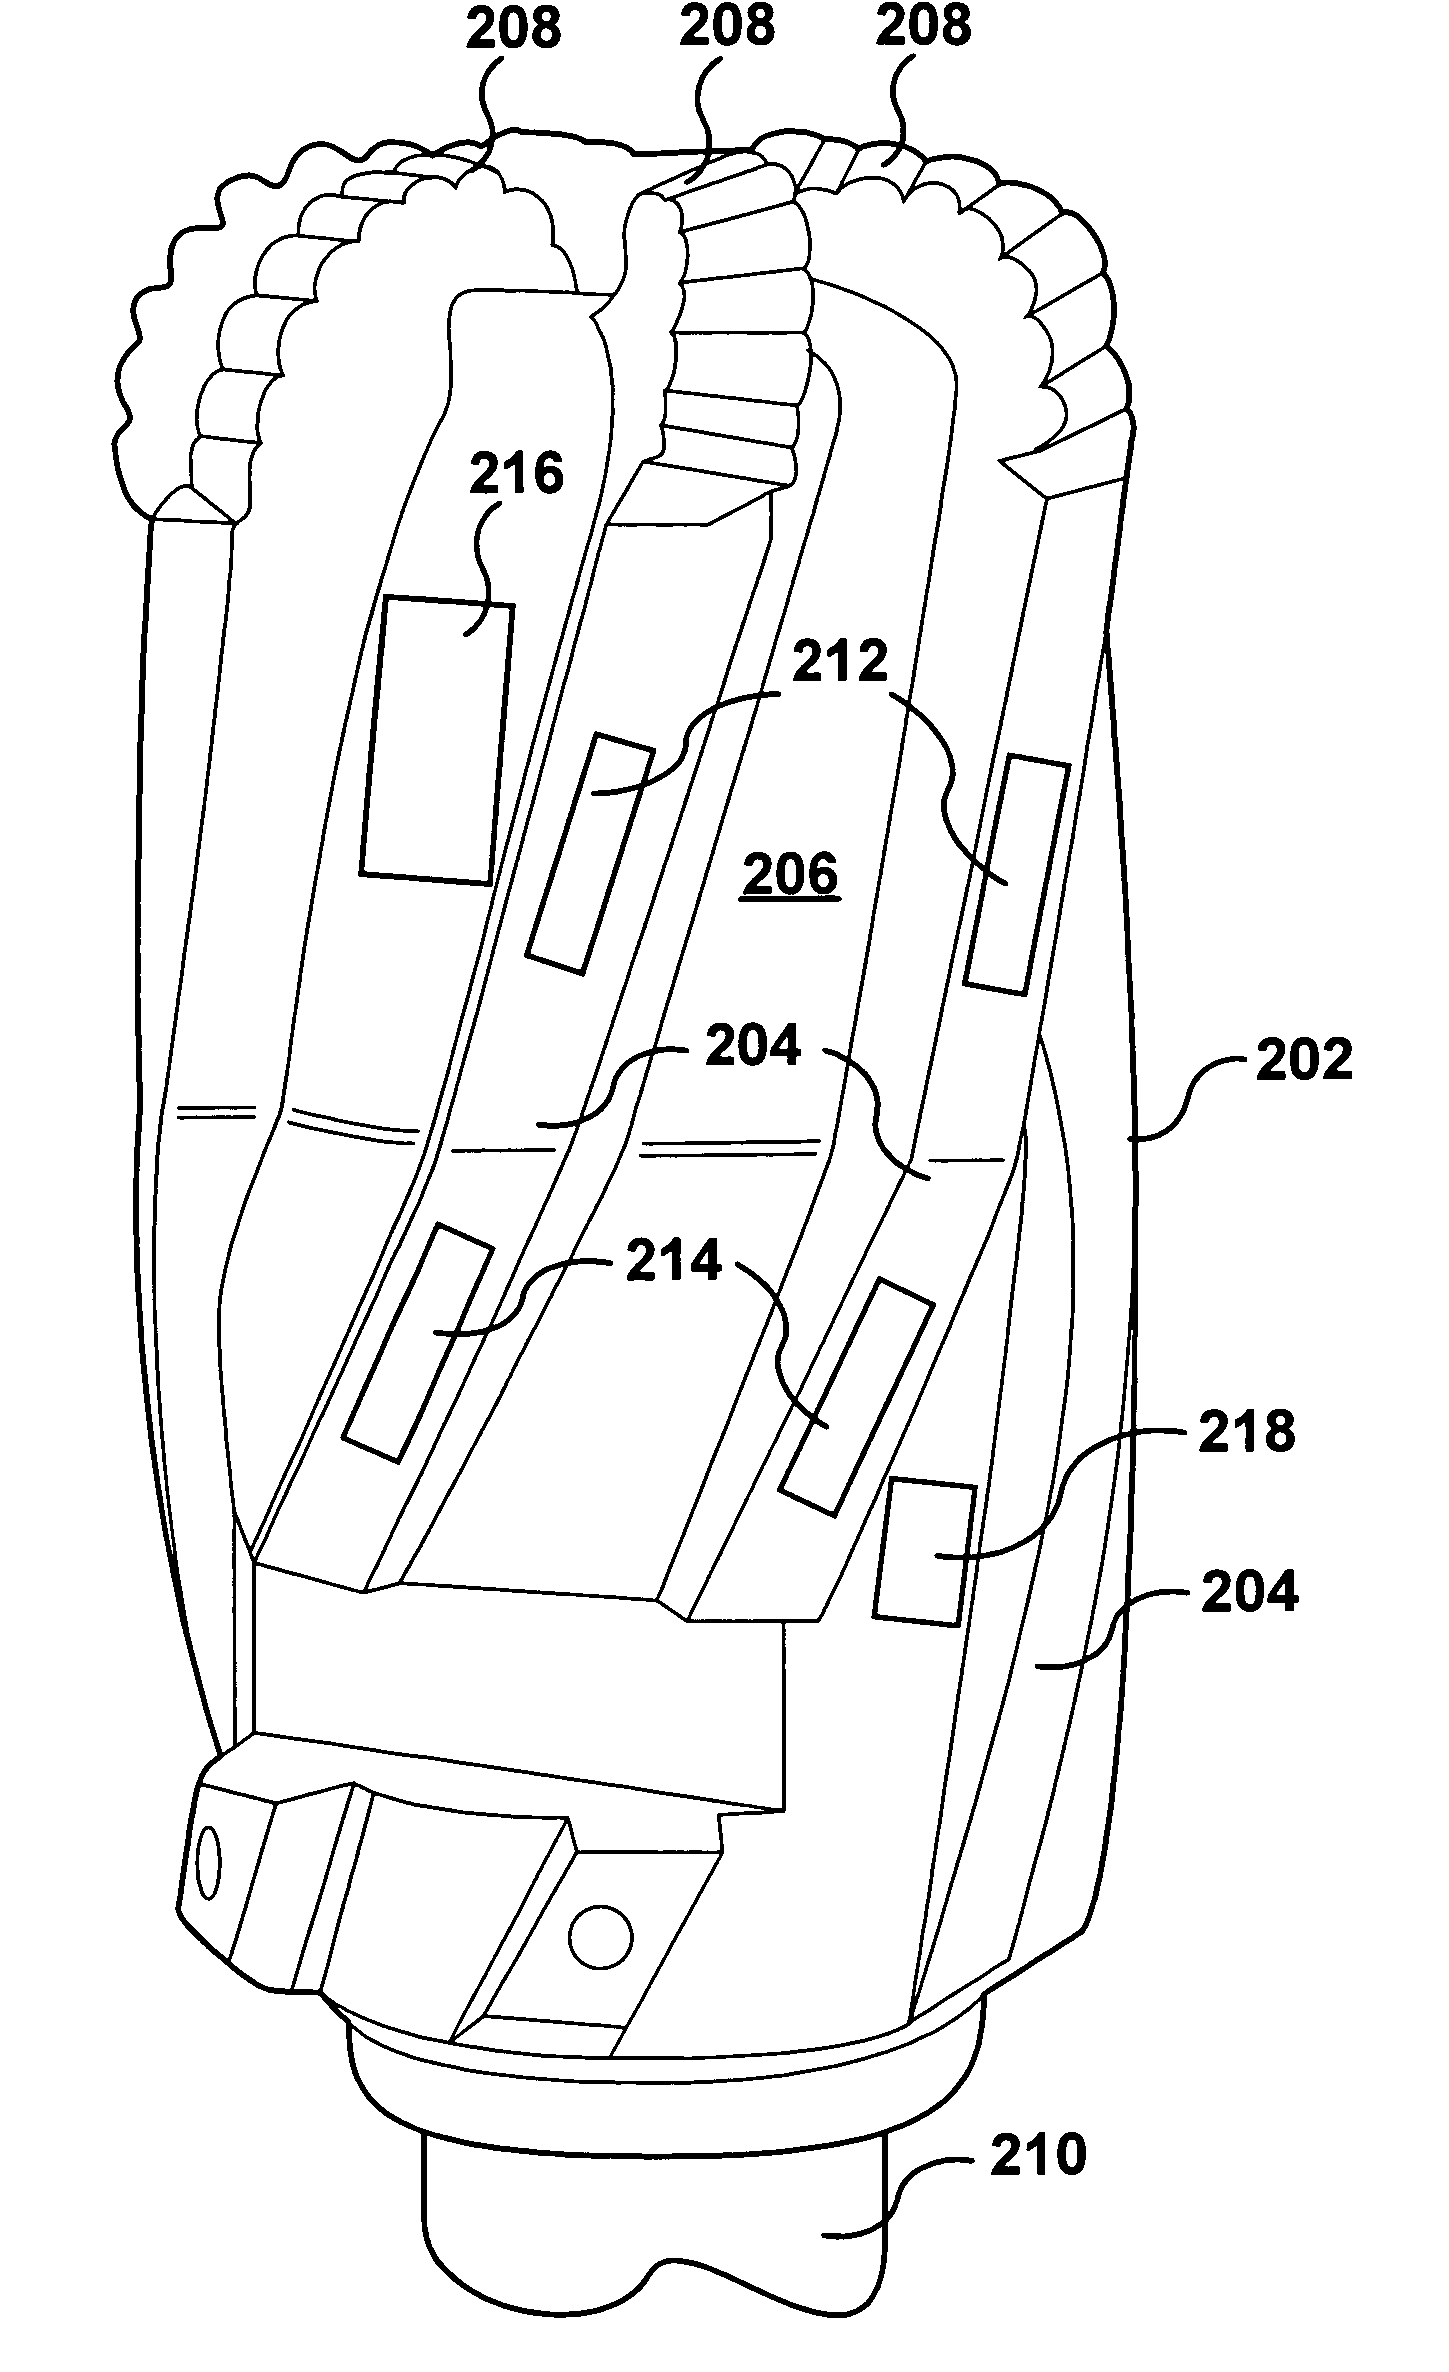 System, method and apparatus for petrophysical and geophysical measurements at the drilling bit